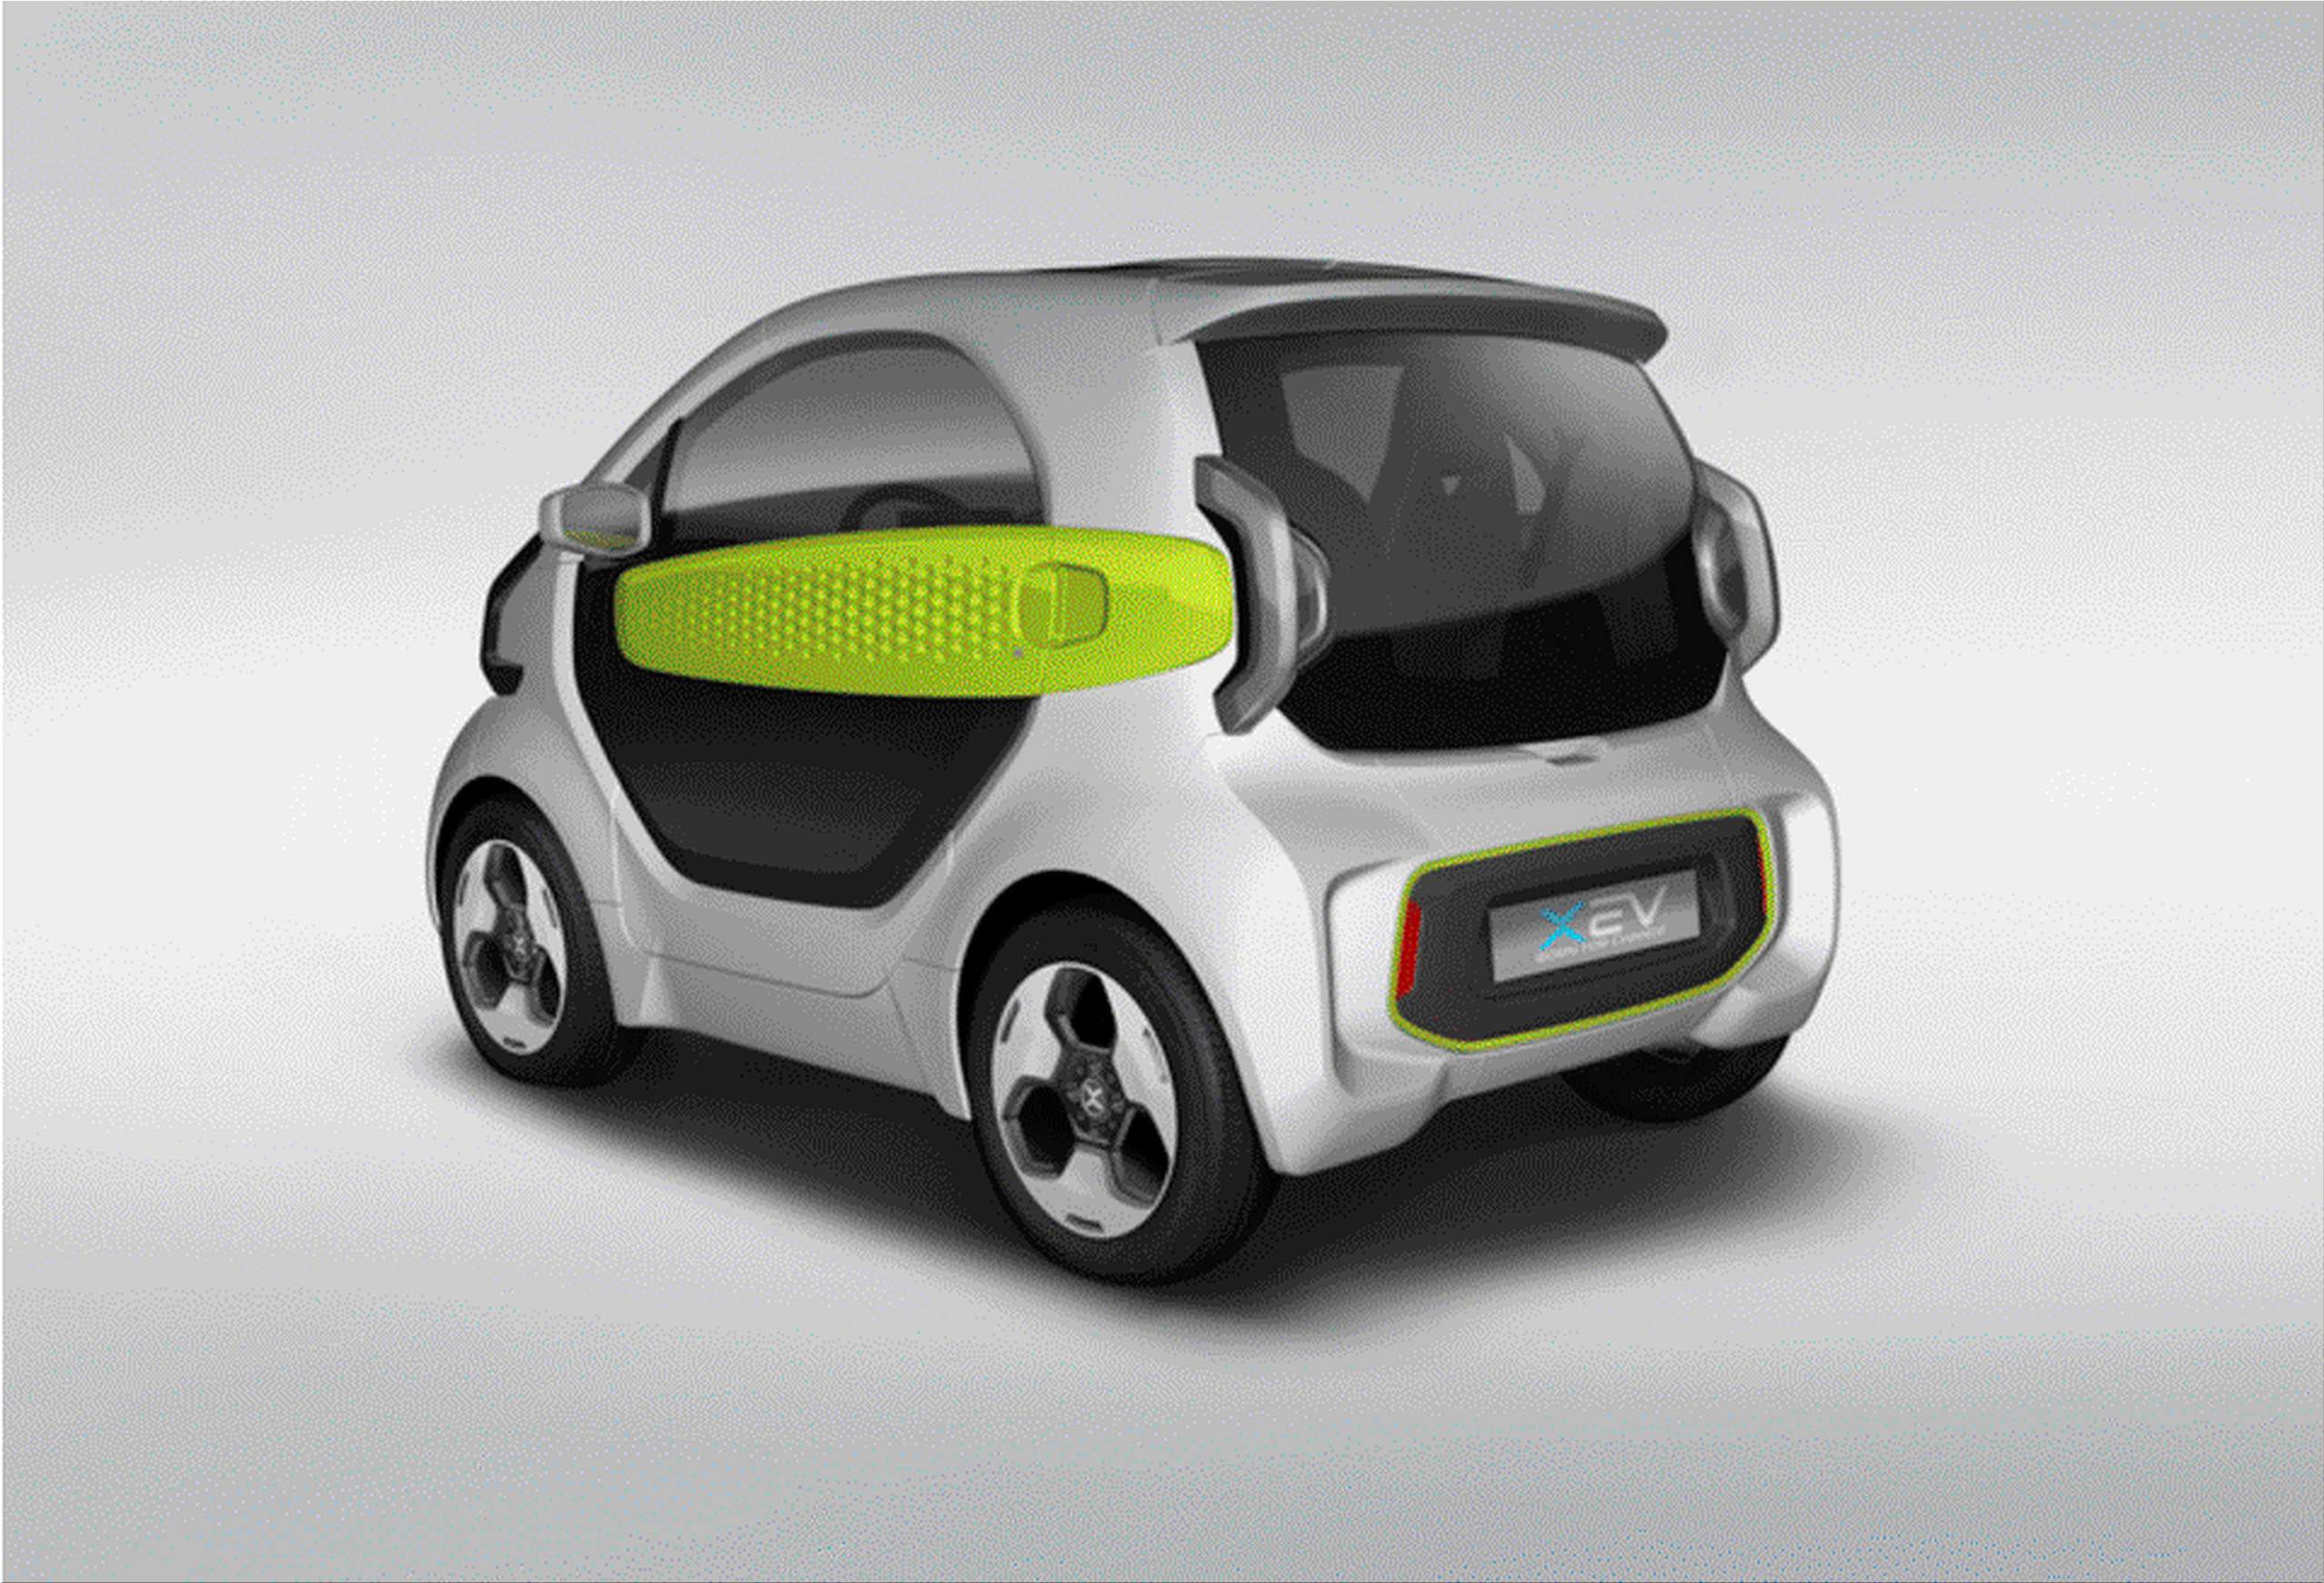 The exceptional XEV is a small electric that costs than 11,100 euros Panorica